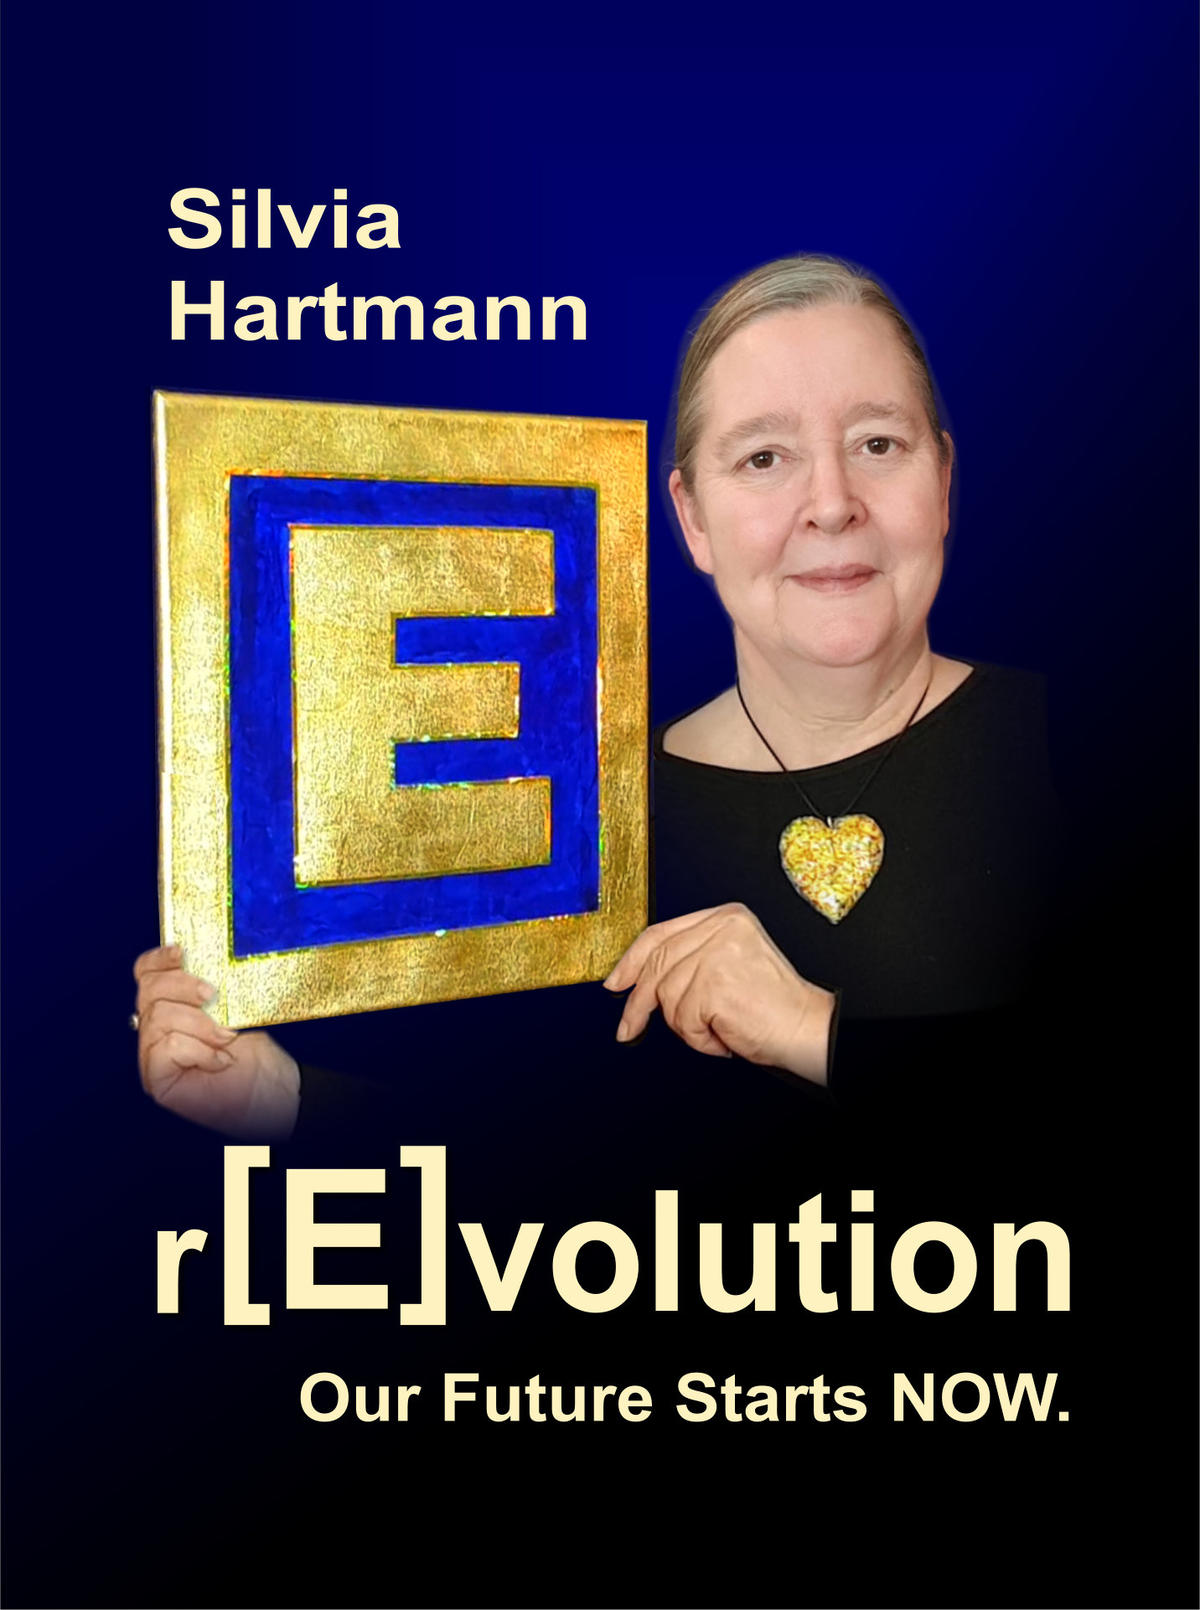 revolution 2nd edition cover featuring the GoE E and Silvia Hartmann